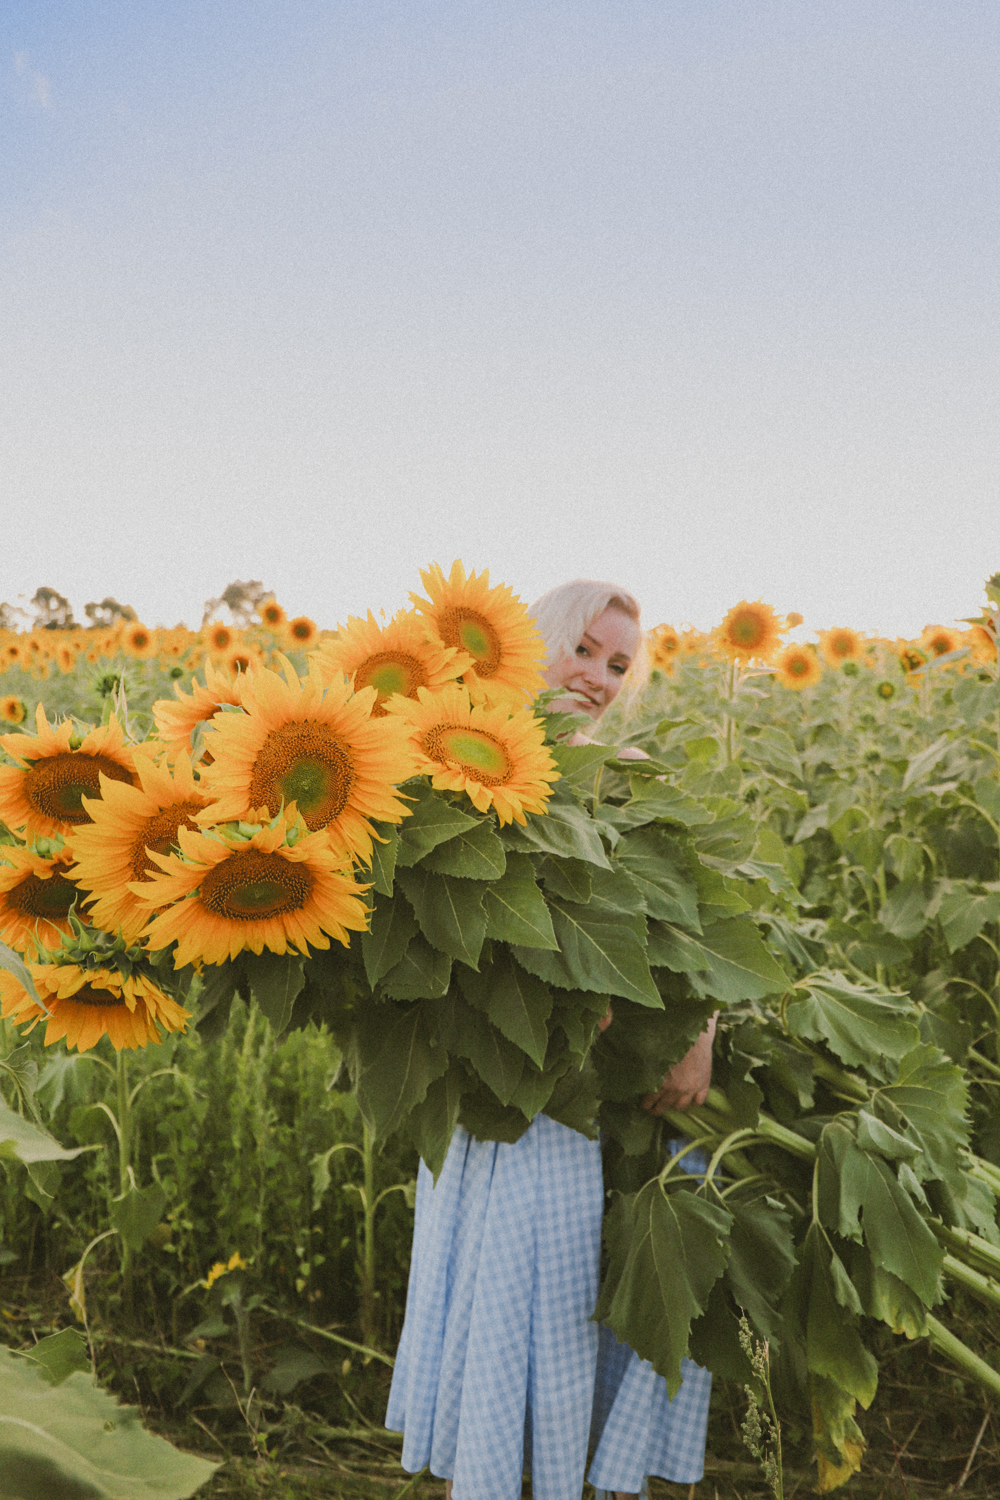 Liana stands in a field of sunflowers in a dress the colour of the sky. Photo taken at Pick Your Own Sunflowers in Dunnstown.